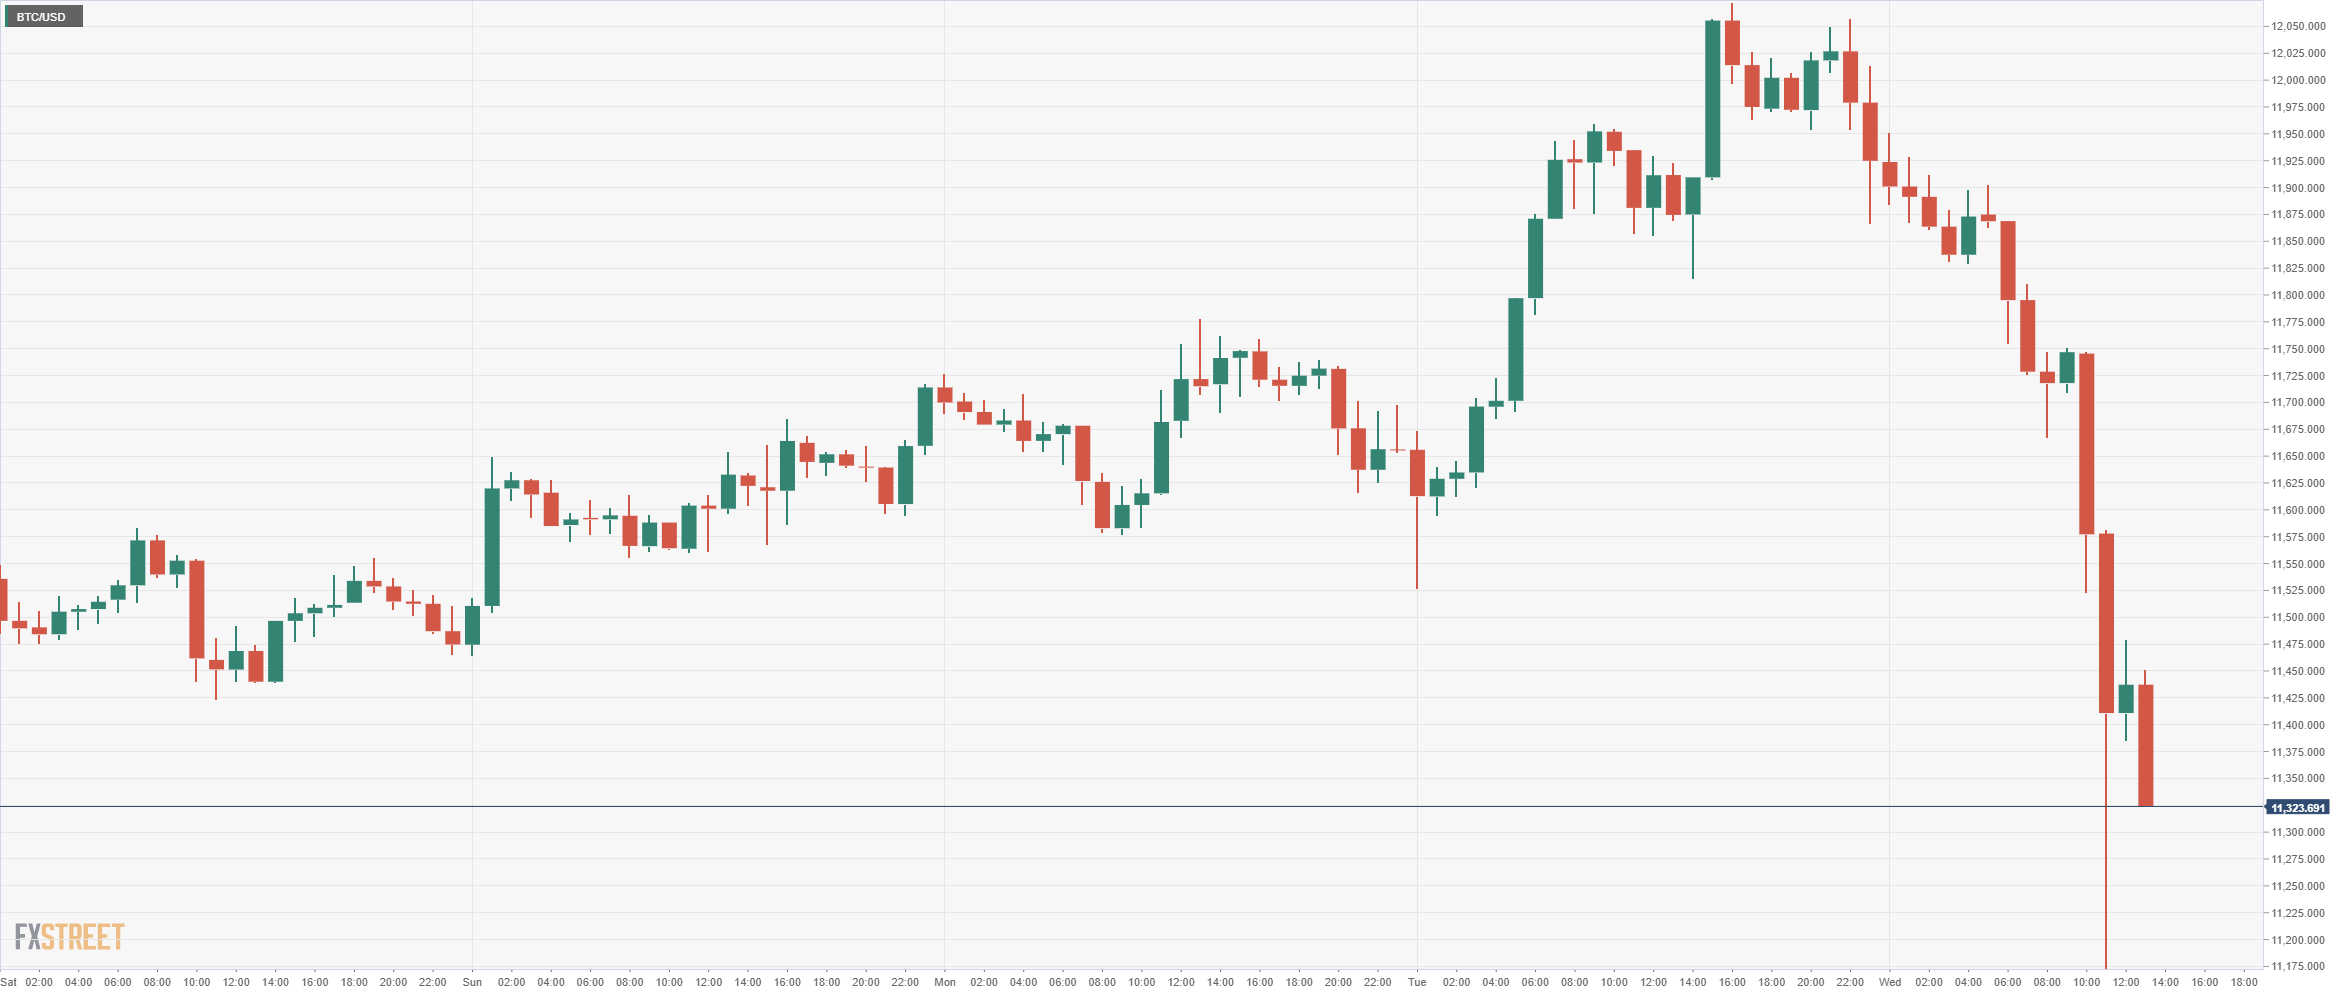 Bitcoin Price Analysis: BTC/USD got rejected from $12,000 after Bithumb gets raided by police